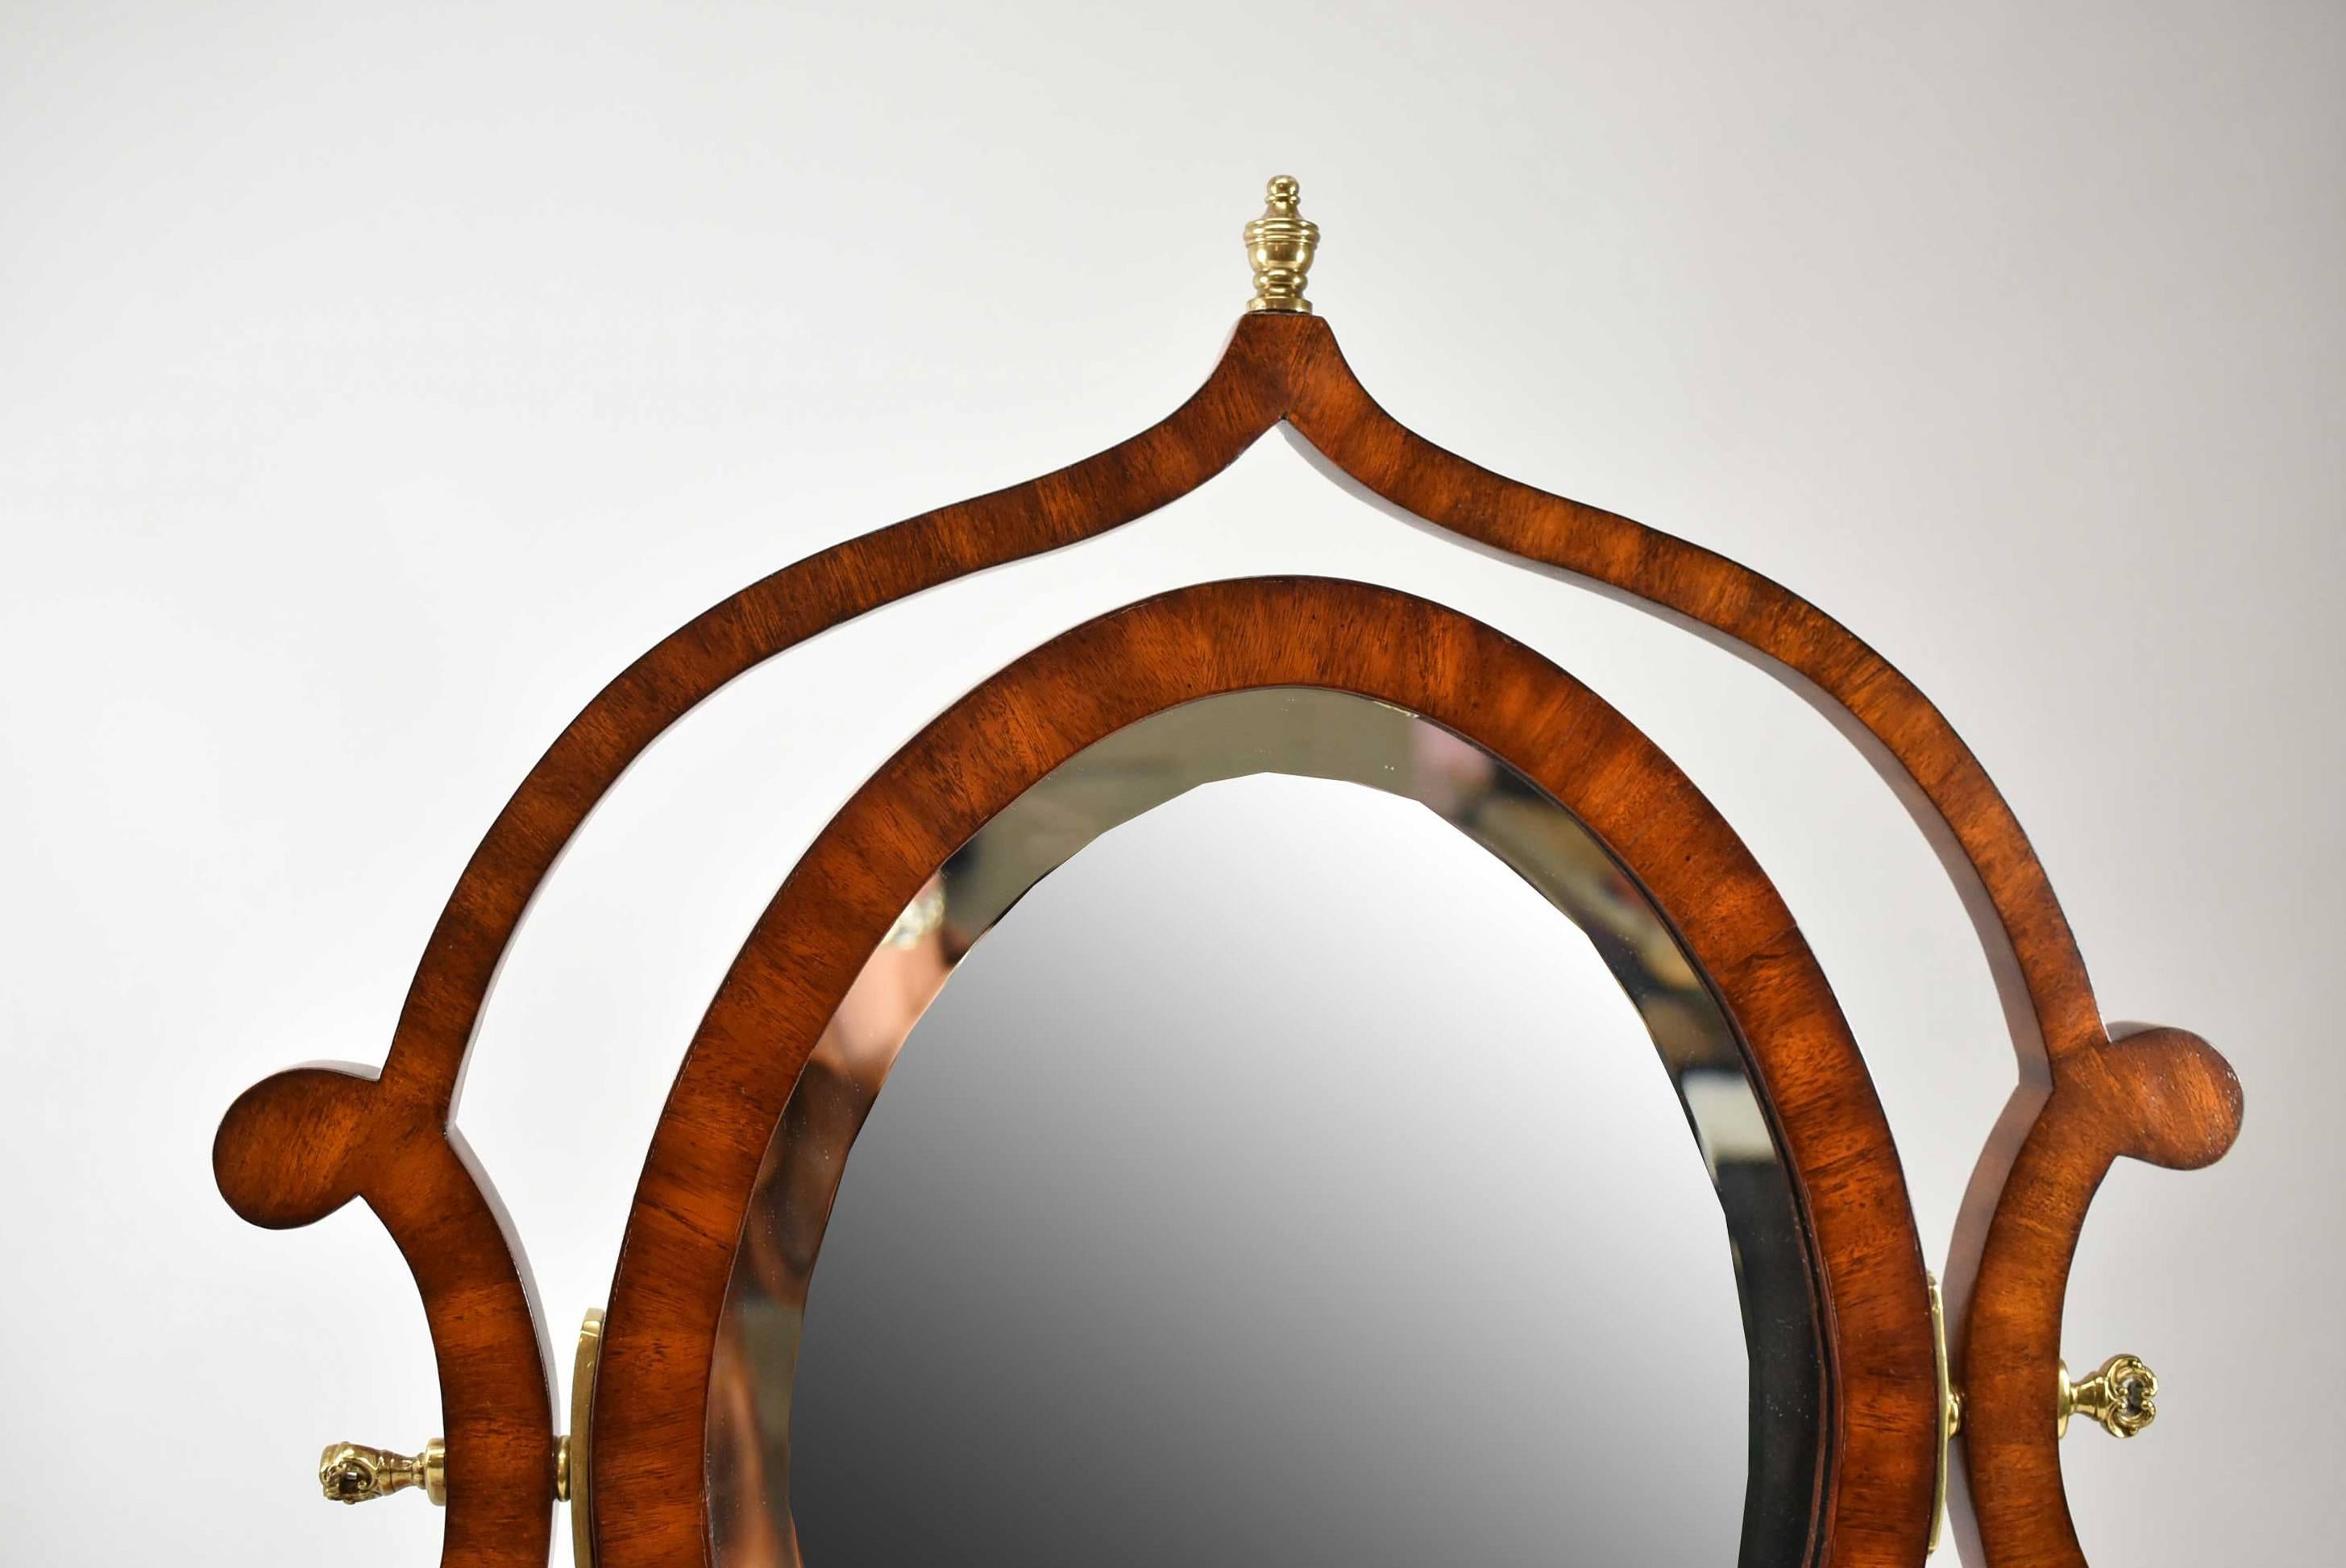 Maitland Smith Chippendale dresser vanity oval beveled mirror. Very good to excellent condition. Dimensions: 9.25